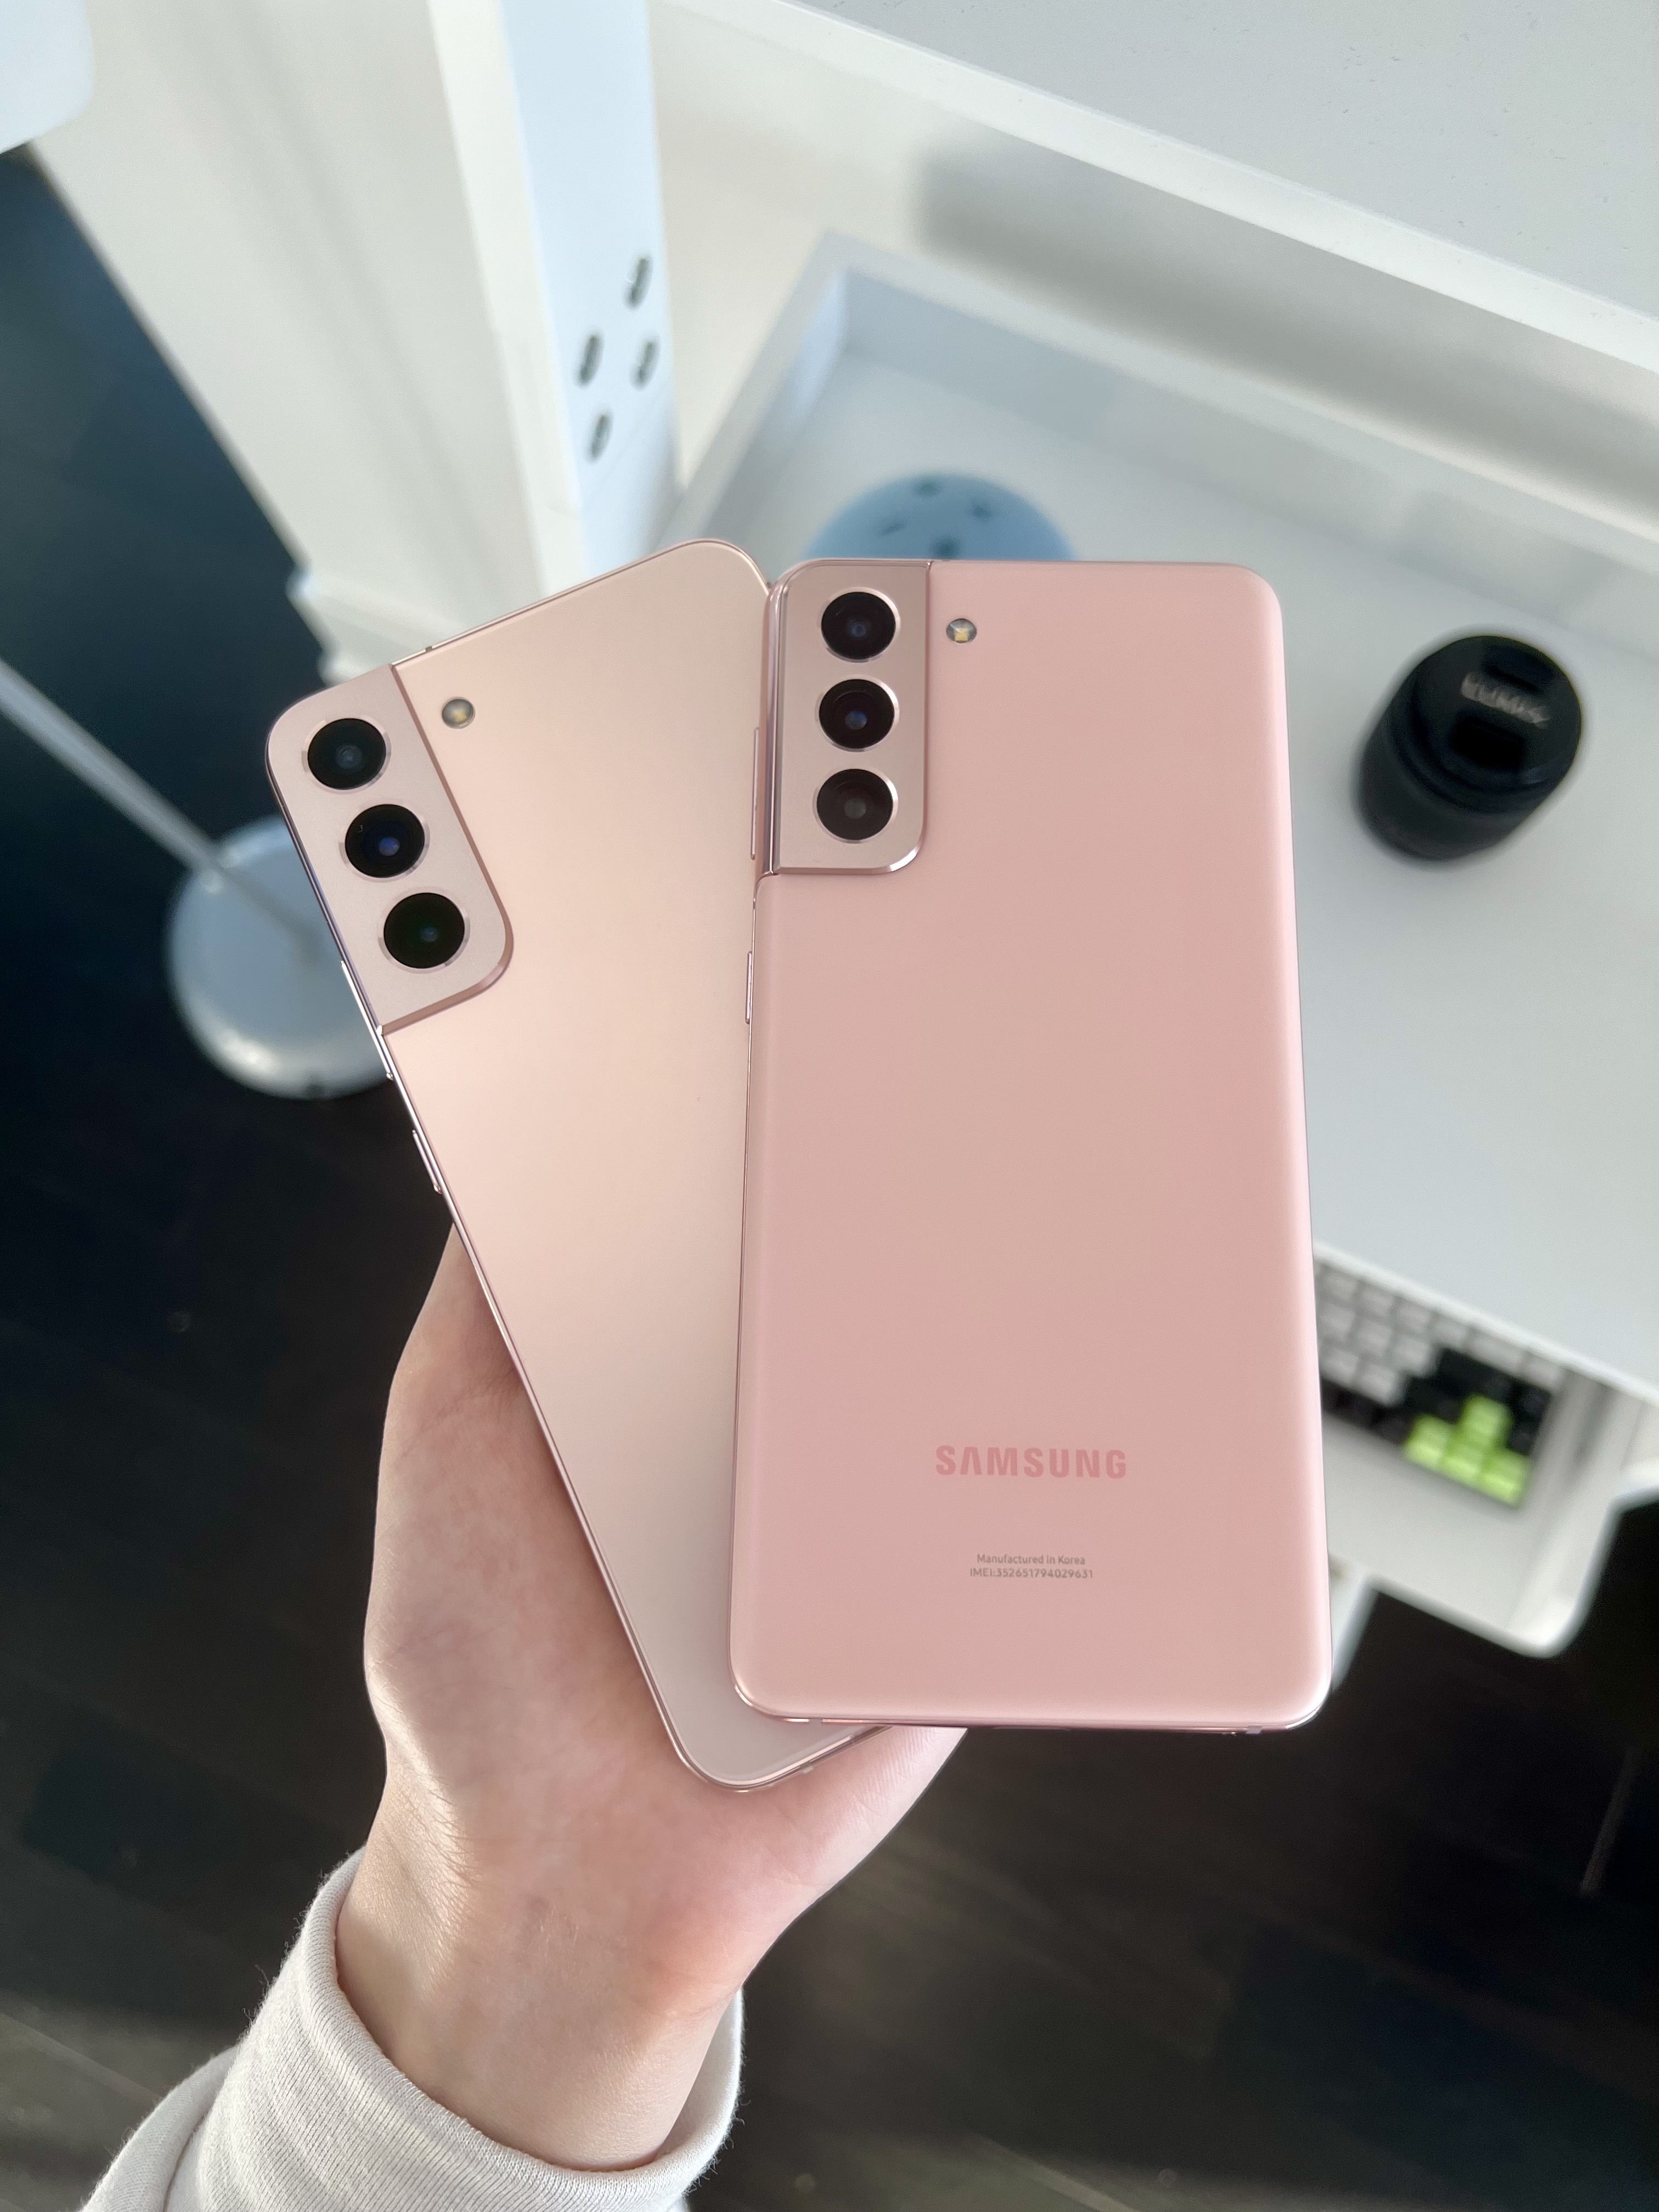 Ella on X: "Just got the SAMSUNG GALAXY S22 Plus in pink gold!!💖 Unboxing  & first impressions video will be up very soon :) #SamsungGalaxyS22 #S22  #GalaxyS22 https://t.co/rpYkFqkhyv" / X